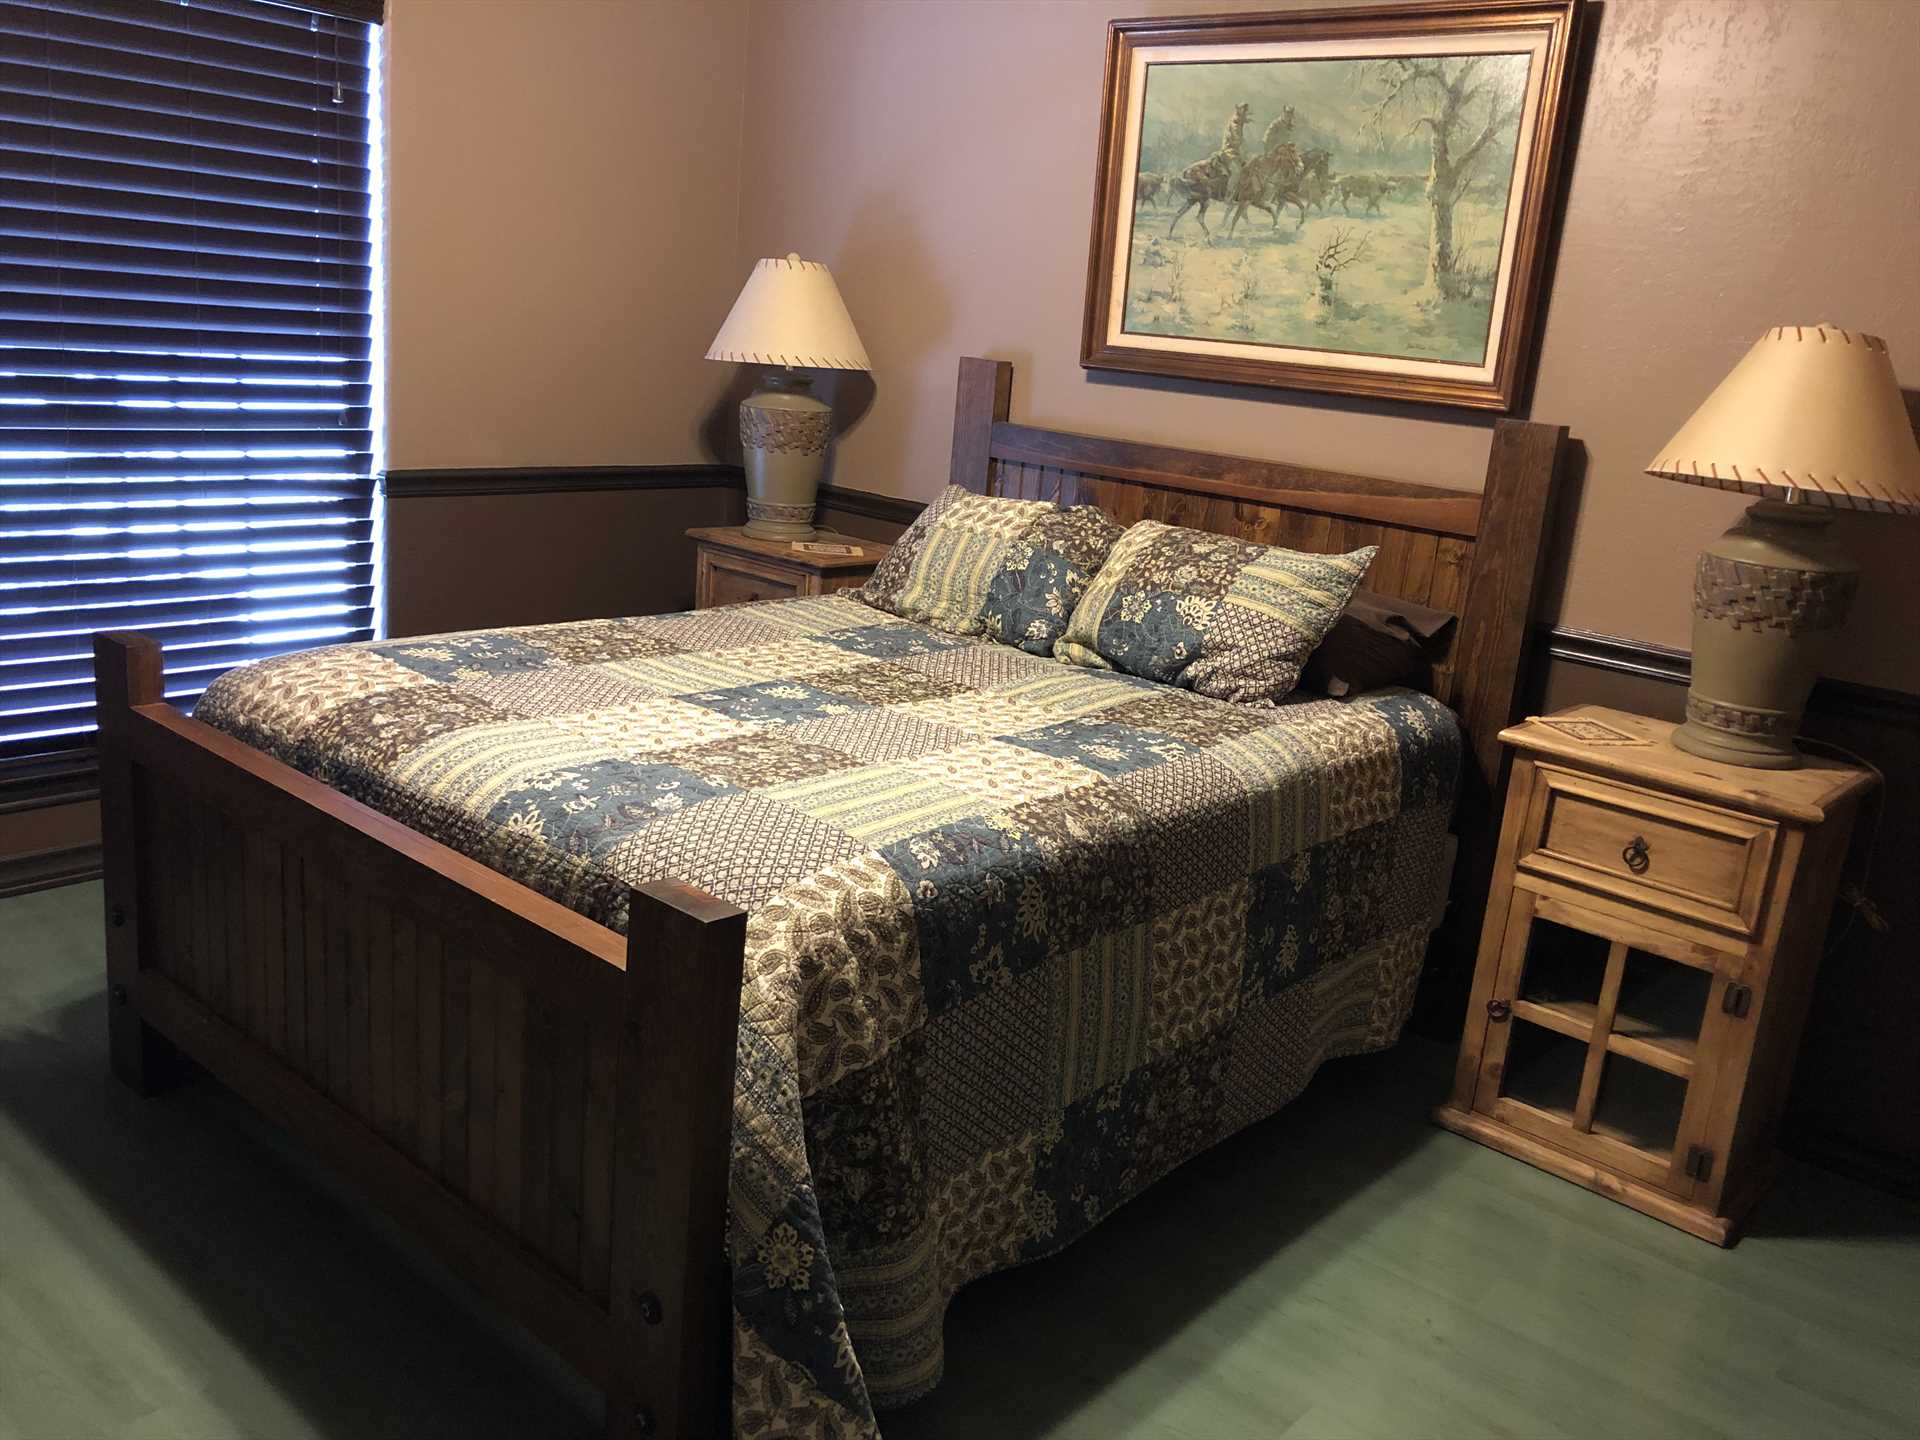                                                 A second queen-sized bed can be found in the second bedroom, the cabin provides spectacular slumber for up to four guests.